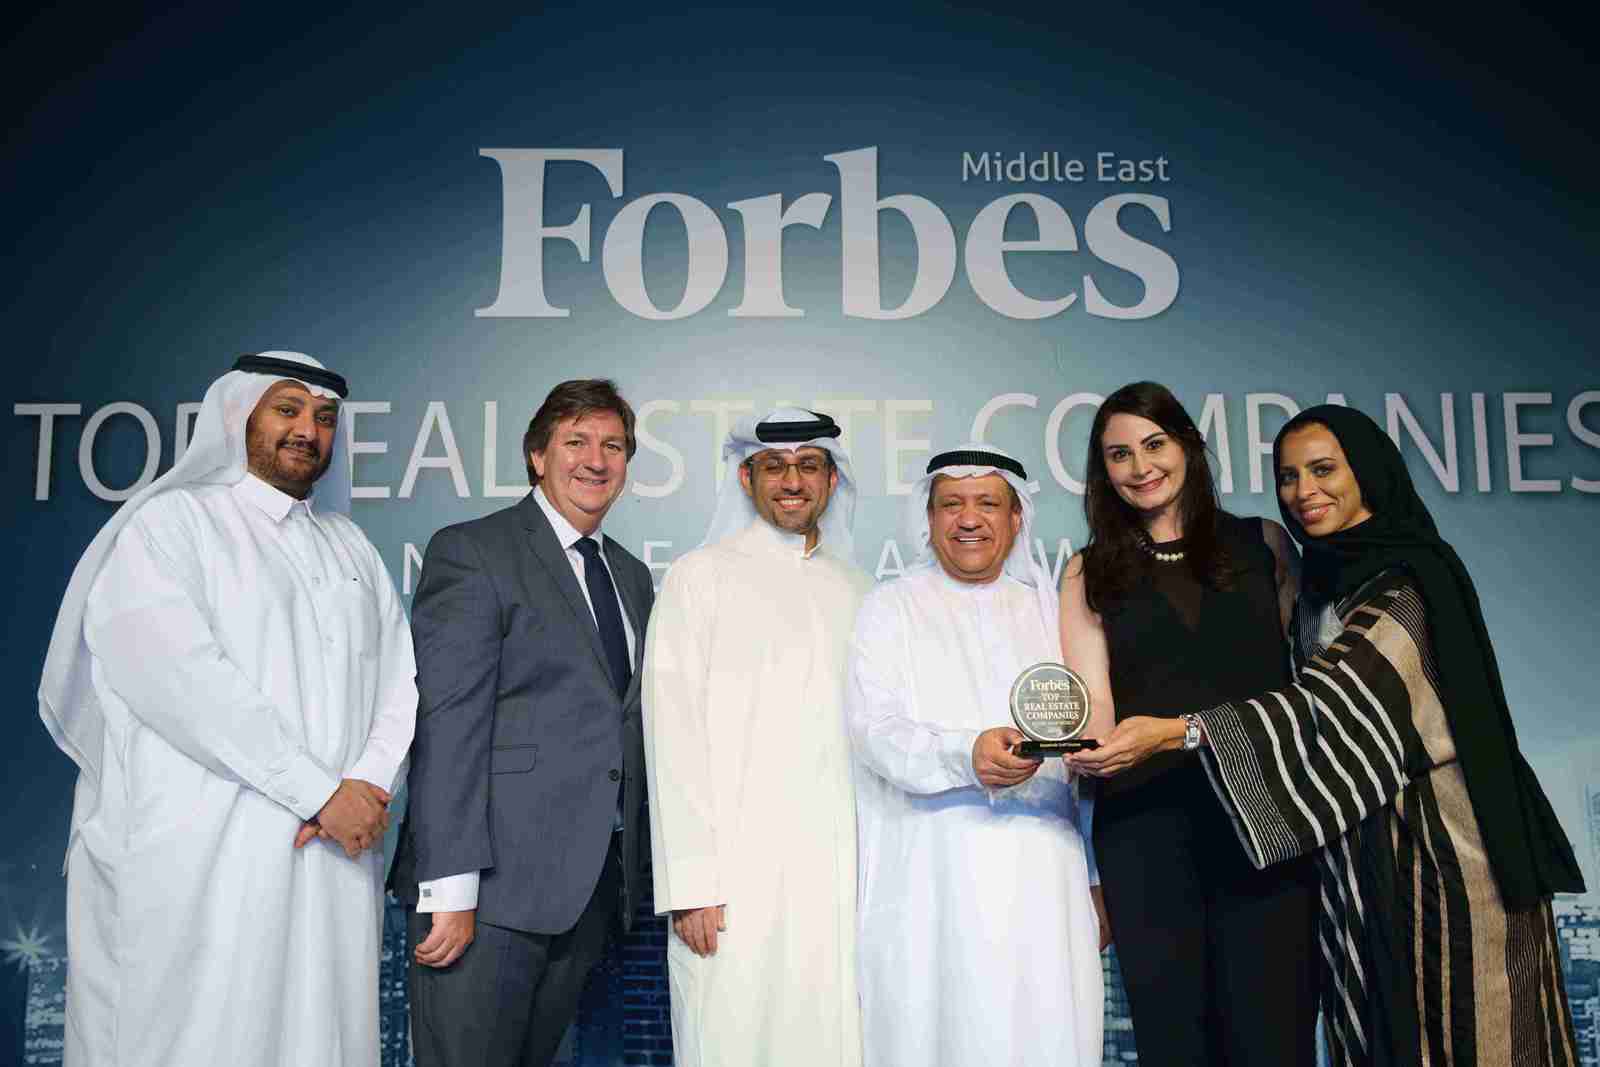 Jumeirah Golf Estates recognized as a Top Real Estate Company in the Arab World